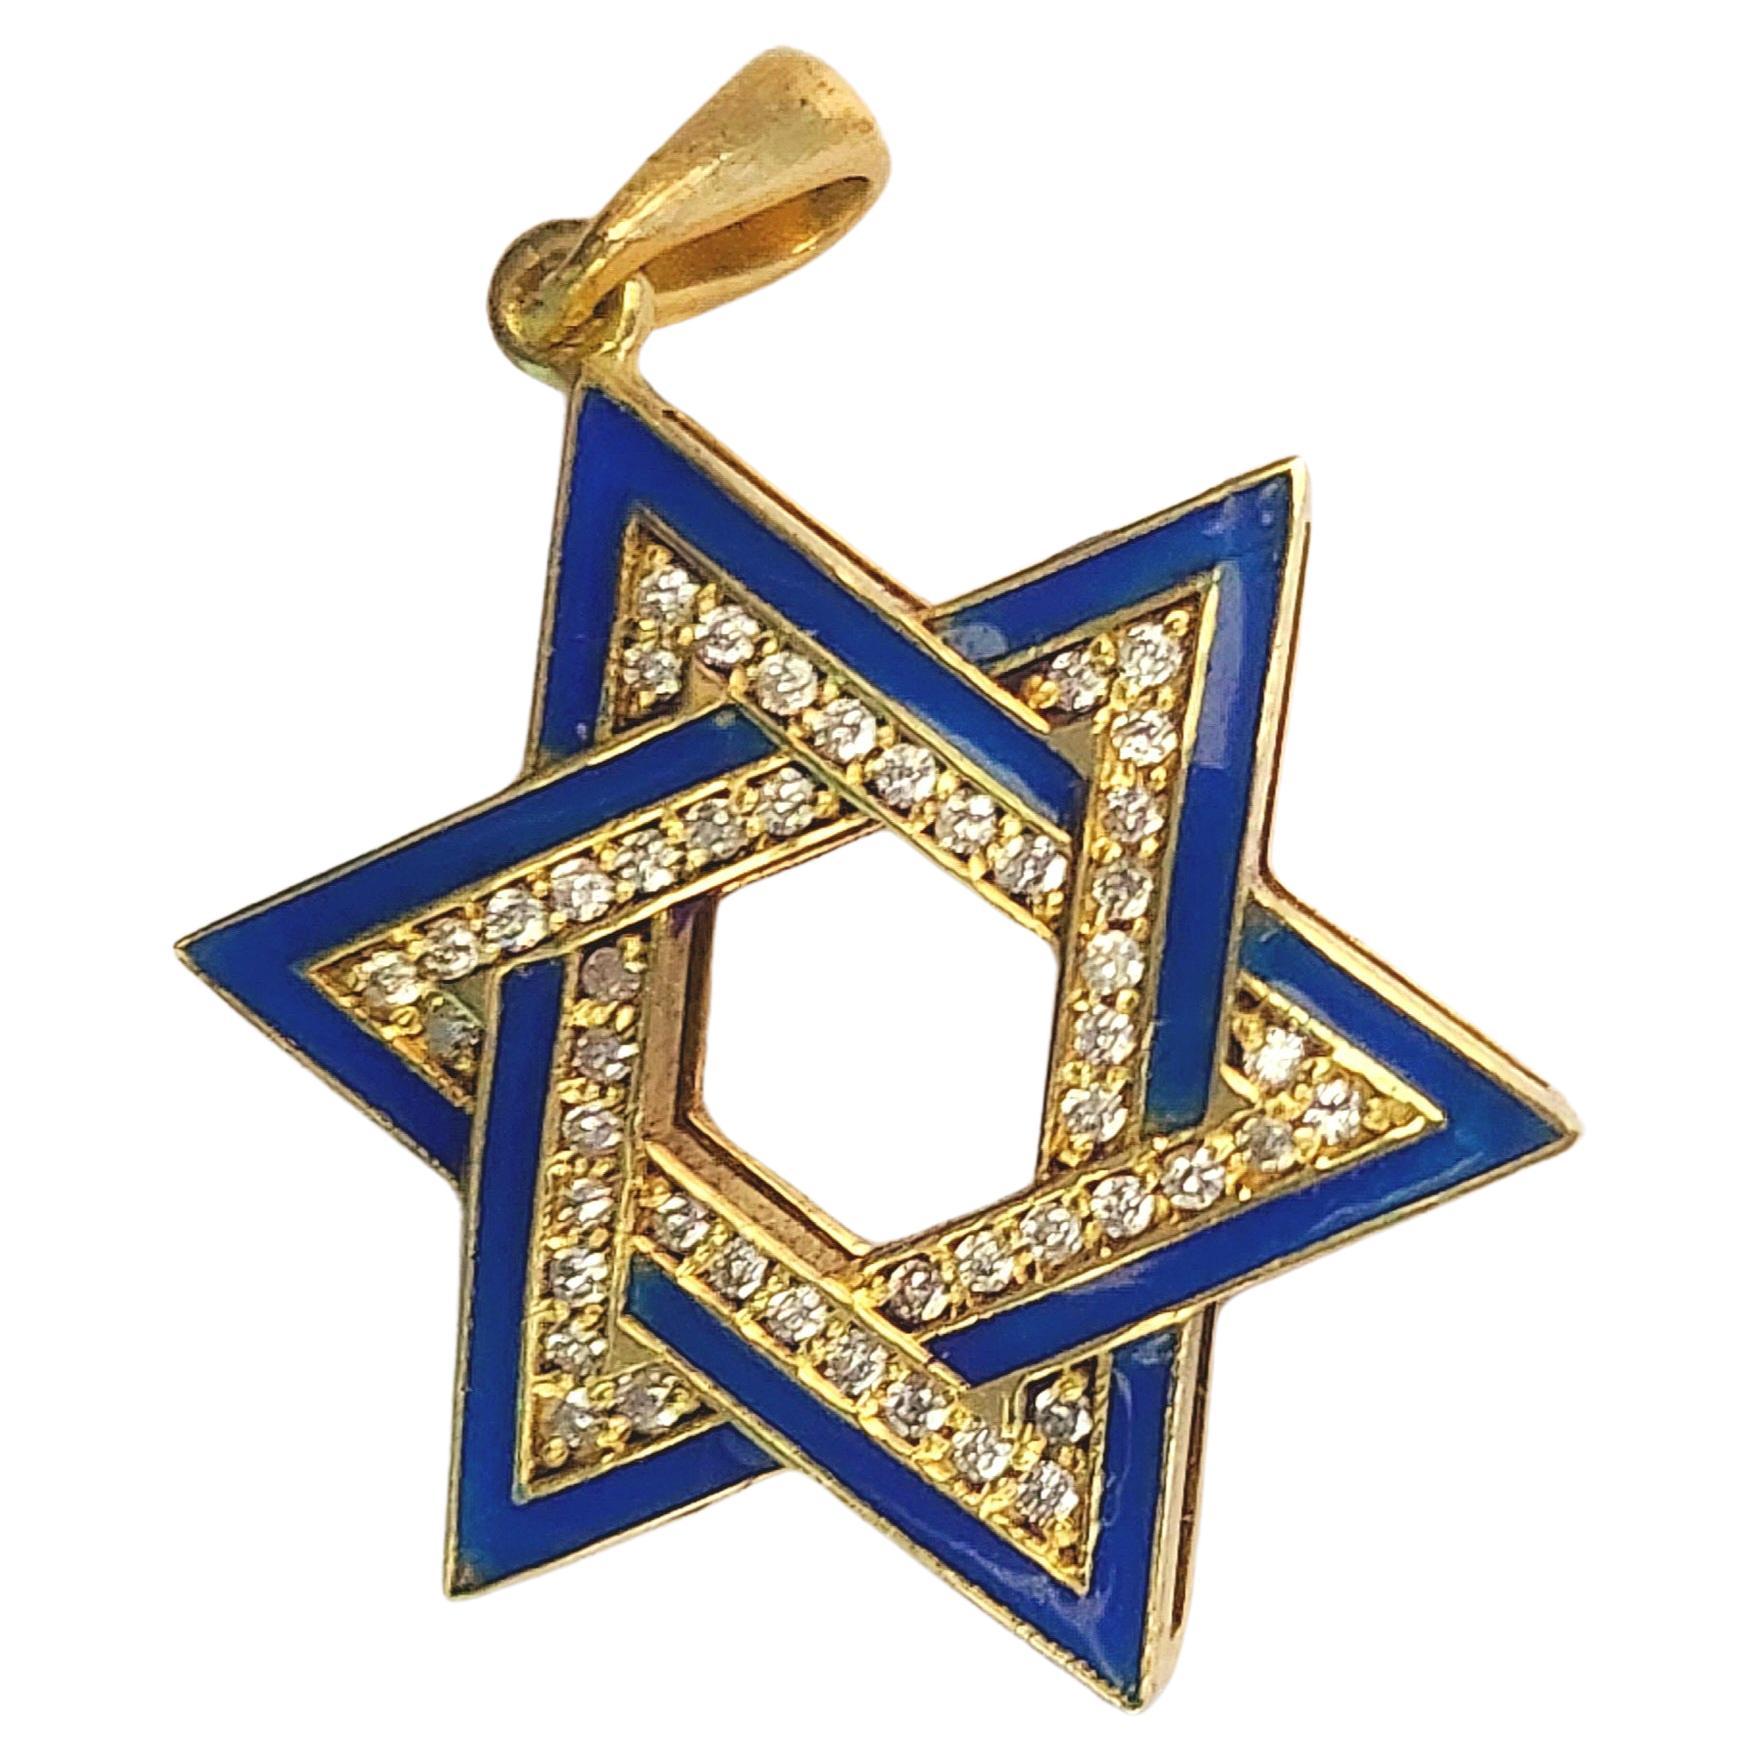 A glistening megan david also known as the star of david vintage 14k gold pendant  with brilliant cut diamonds estimate weight of 0.30 carats decorted with blue enamel 7.50 grams of gold in open work style on the back